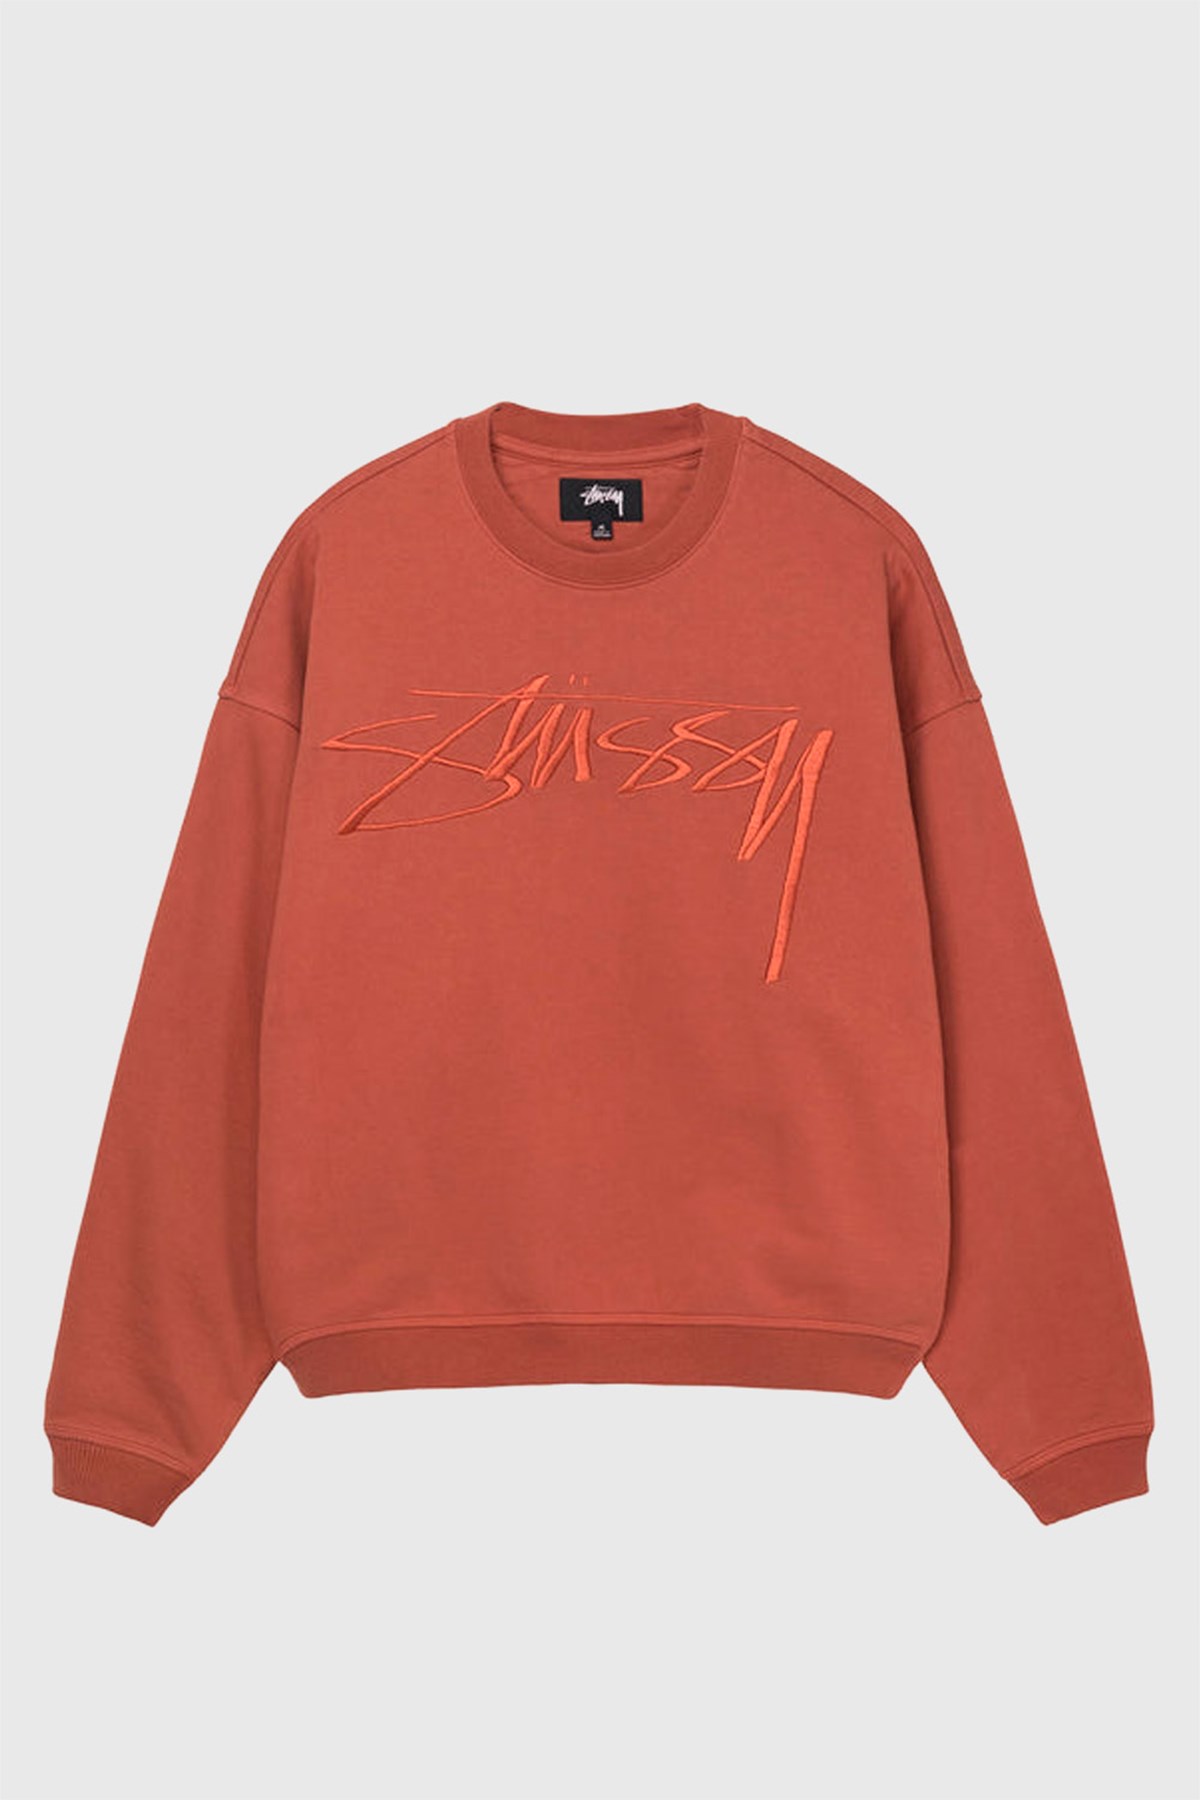 Stüssy Relaxed Smoothstock Crew Brick | WoodWood.com